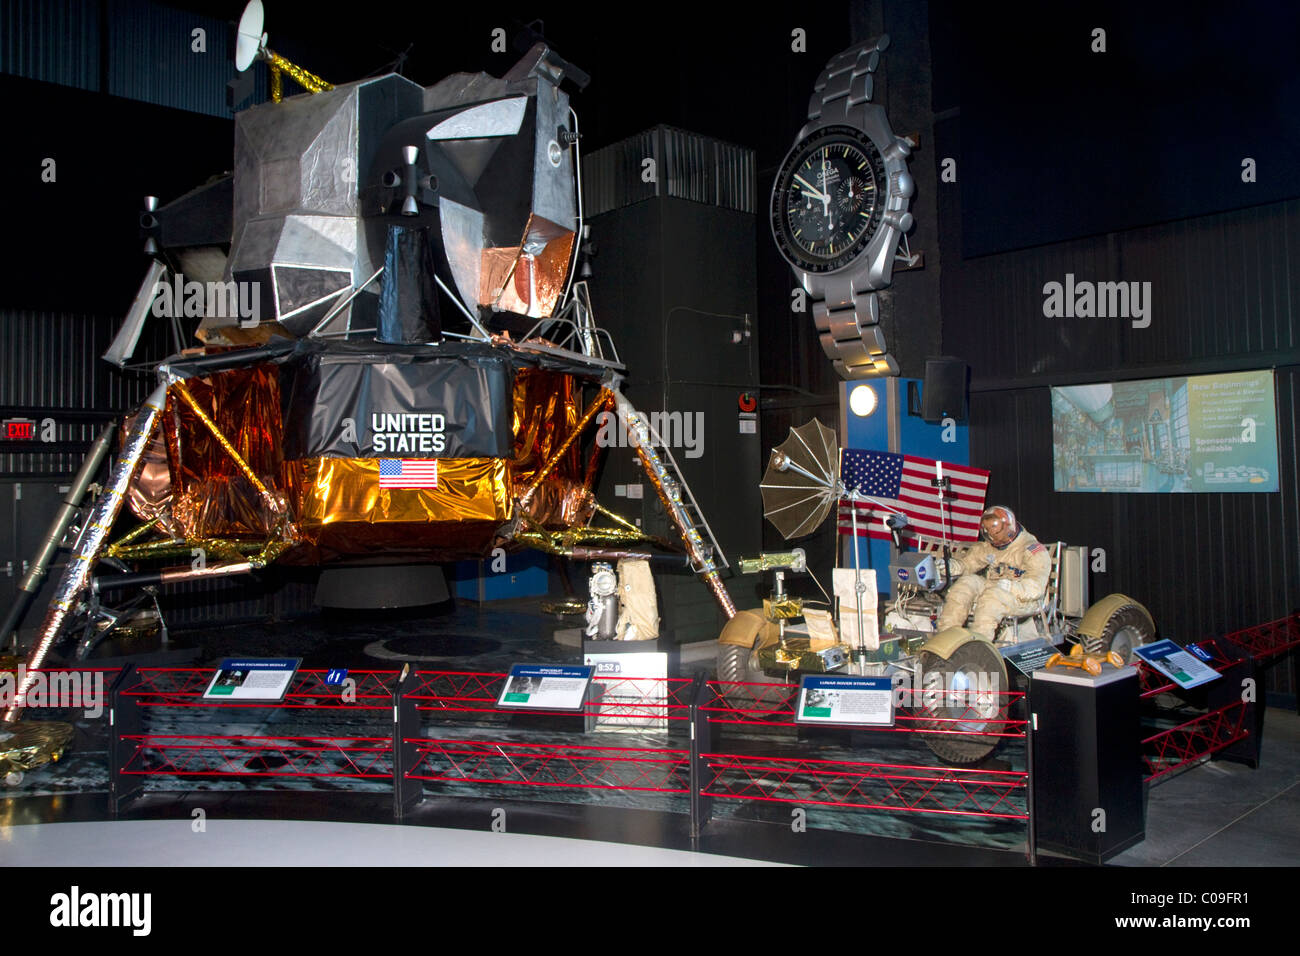 Apollo 16 lunar module Orion and Lunar Rover at the U.S. Space and Rocket Center located in Huntsville, Alabama, USA. Stock Photo